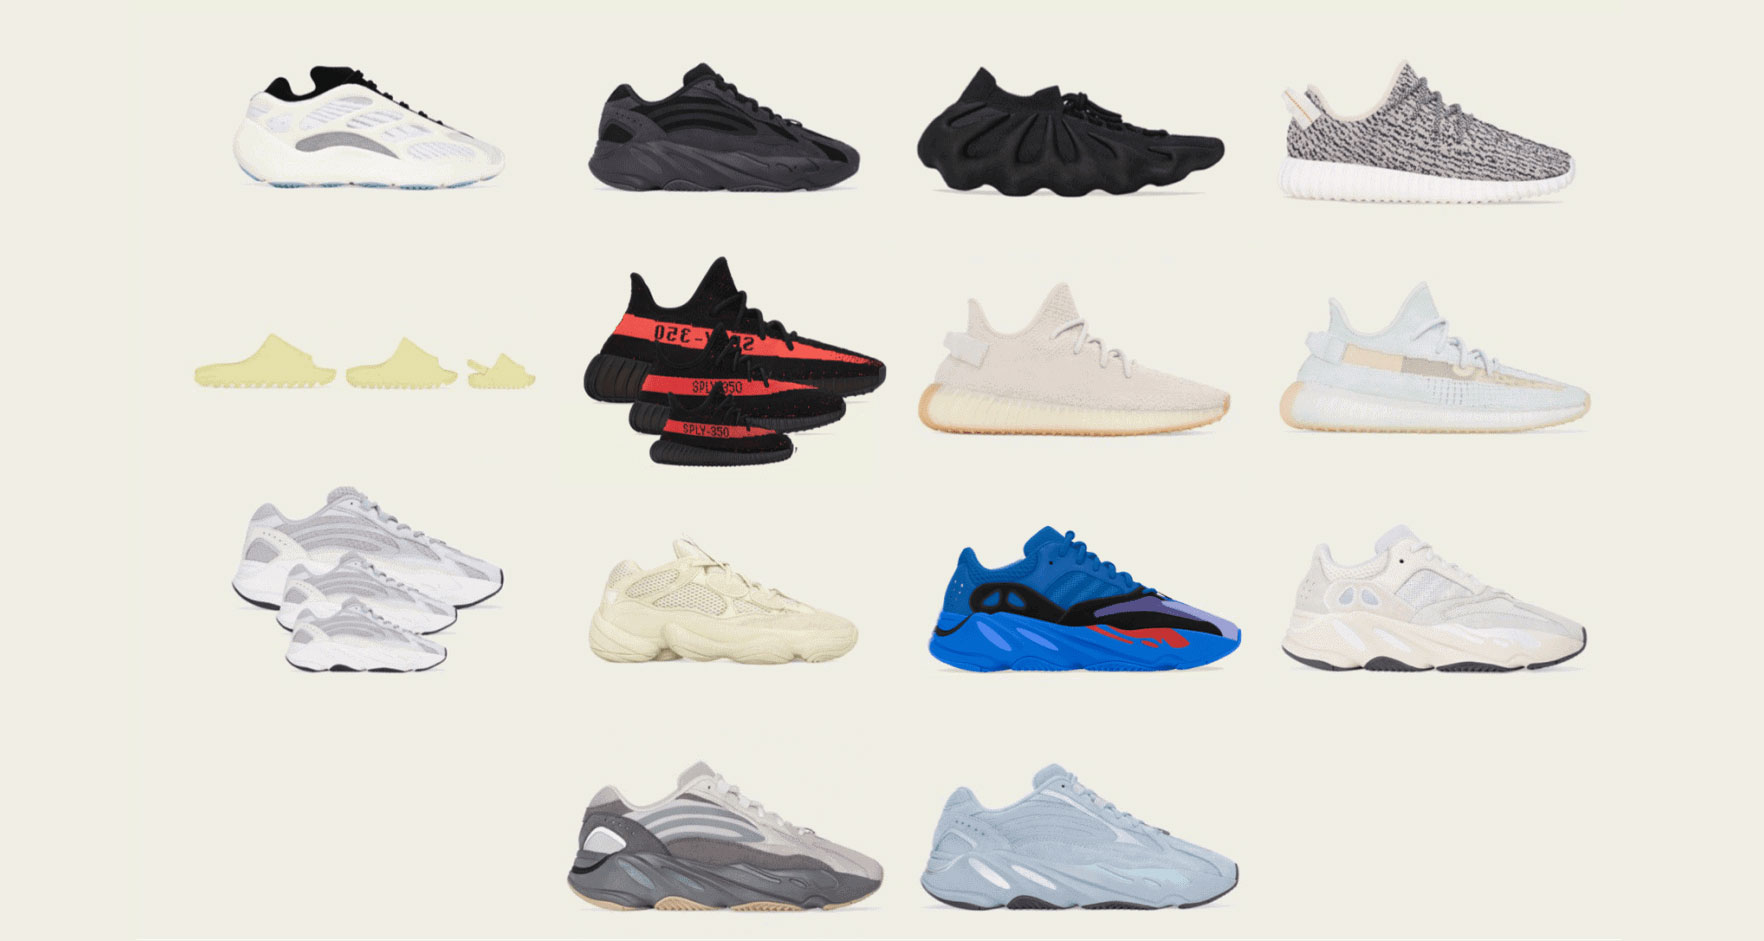 New Yeezy Foam Runners Available -Size 6,7,10,11,12,13,14